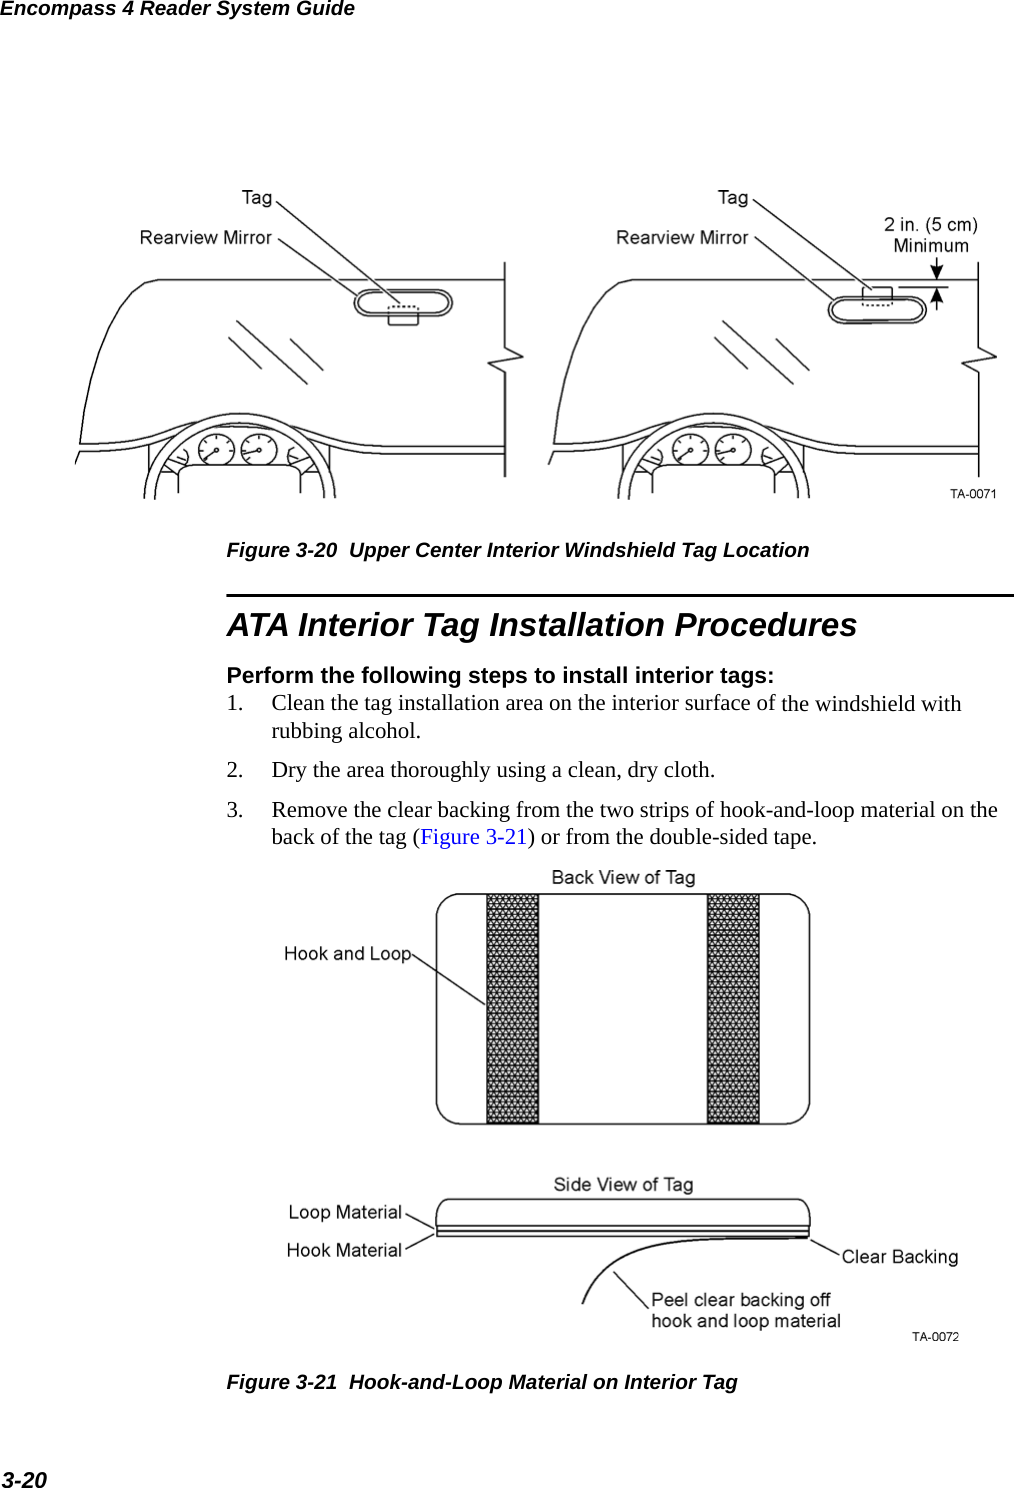 Encompass 4 Reader System Guide3-20Figure 3-20  Upper Center Interior Windshield Tag LocationATA Interior Tag Installation ProceduresPerform the following steps to install interior tags:1. Clean the tag installation area on the interior surface of the windshield with rubbing alcohol.2. Dry the area thoroughly using a clean, dry cloth.3. Remove the clear backing from the two strips of hook-and-loop material on the back of the tag (Figure 3-21) or from the double-sided tape.Figure 3-21  Hook-and-Loop Material on Interior Tag